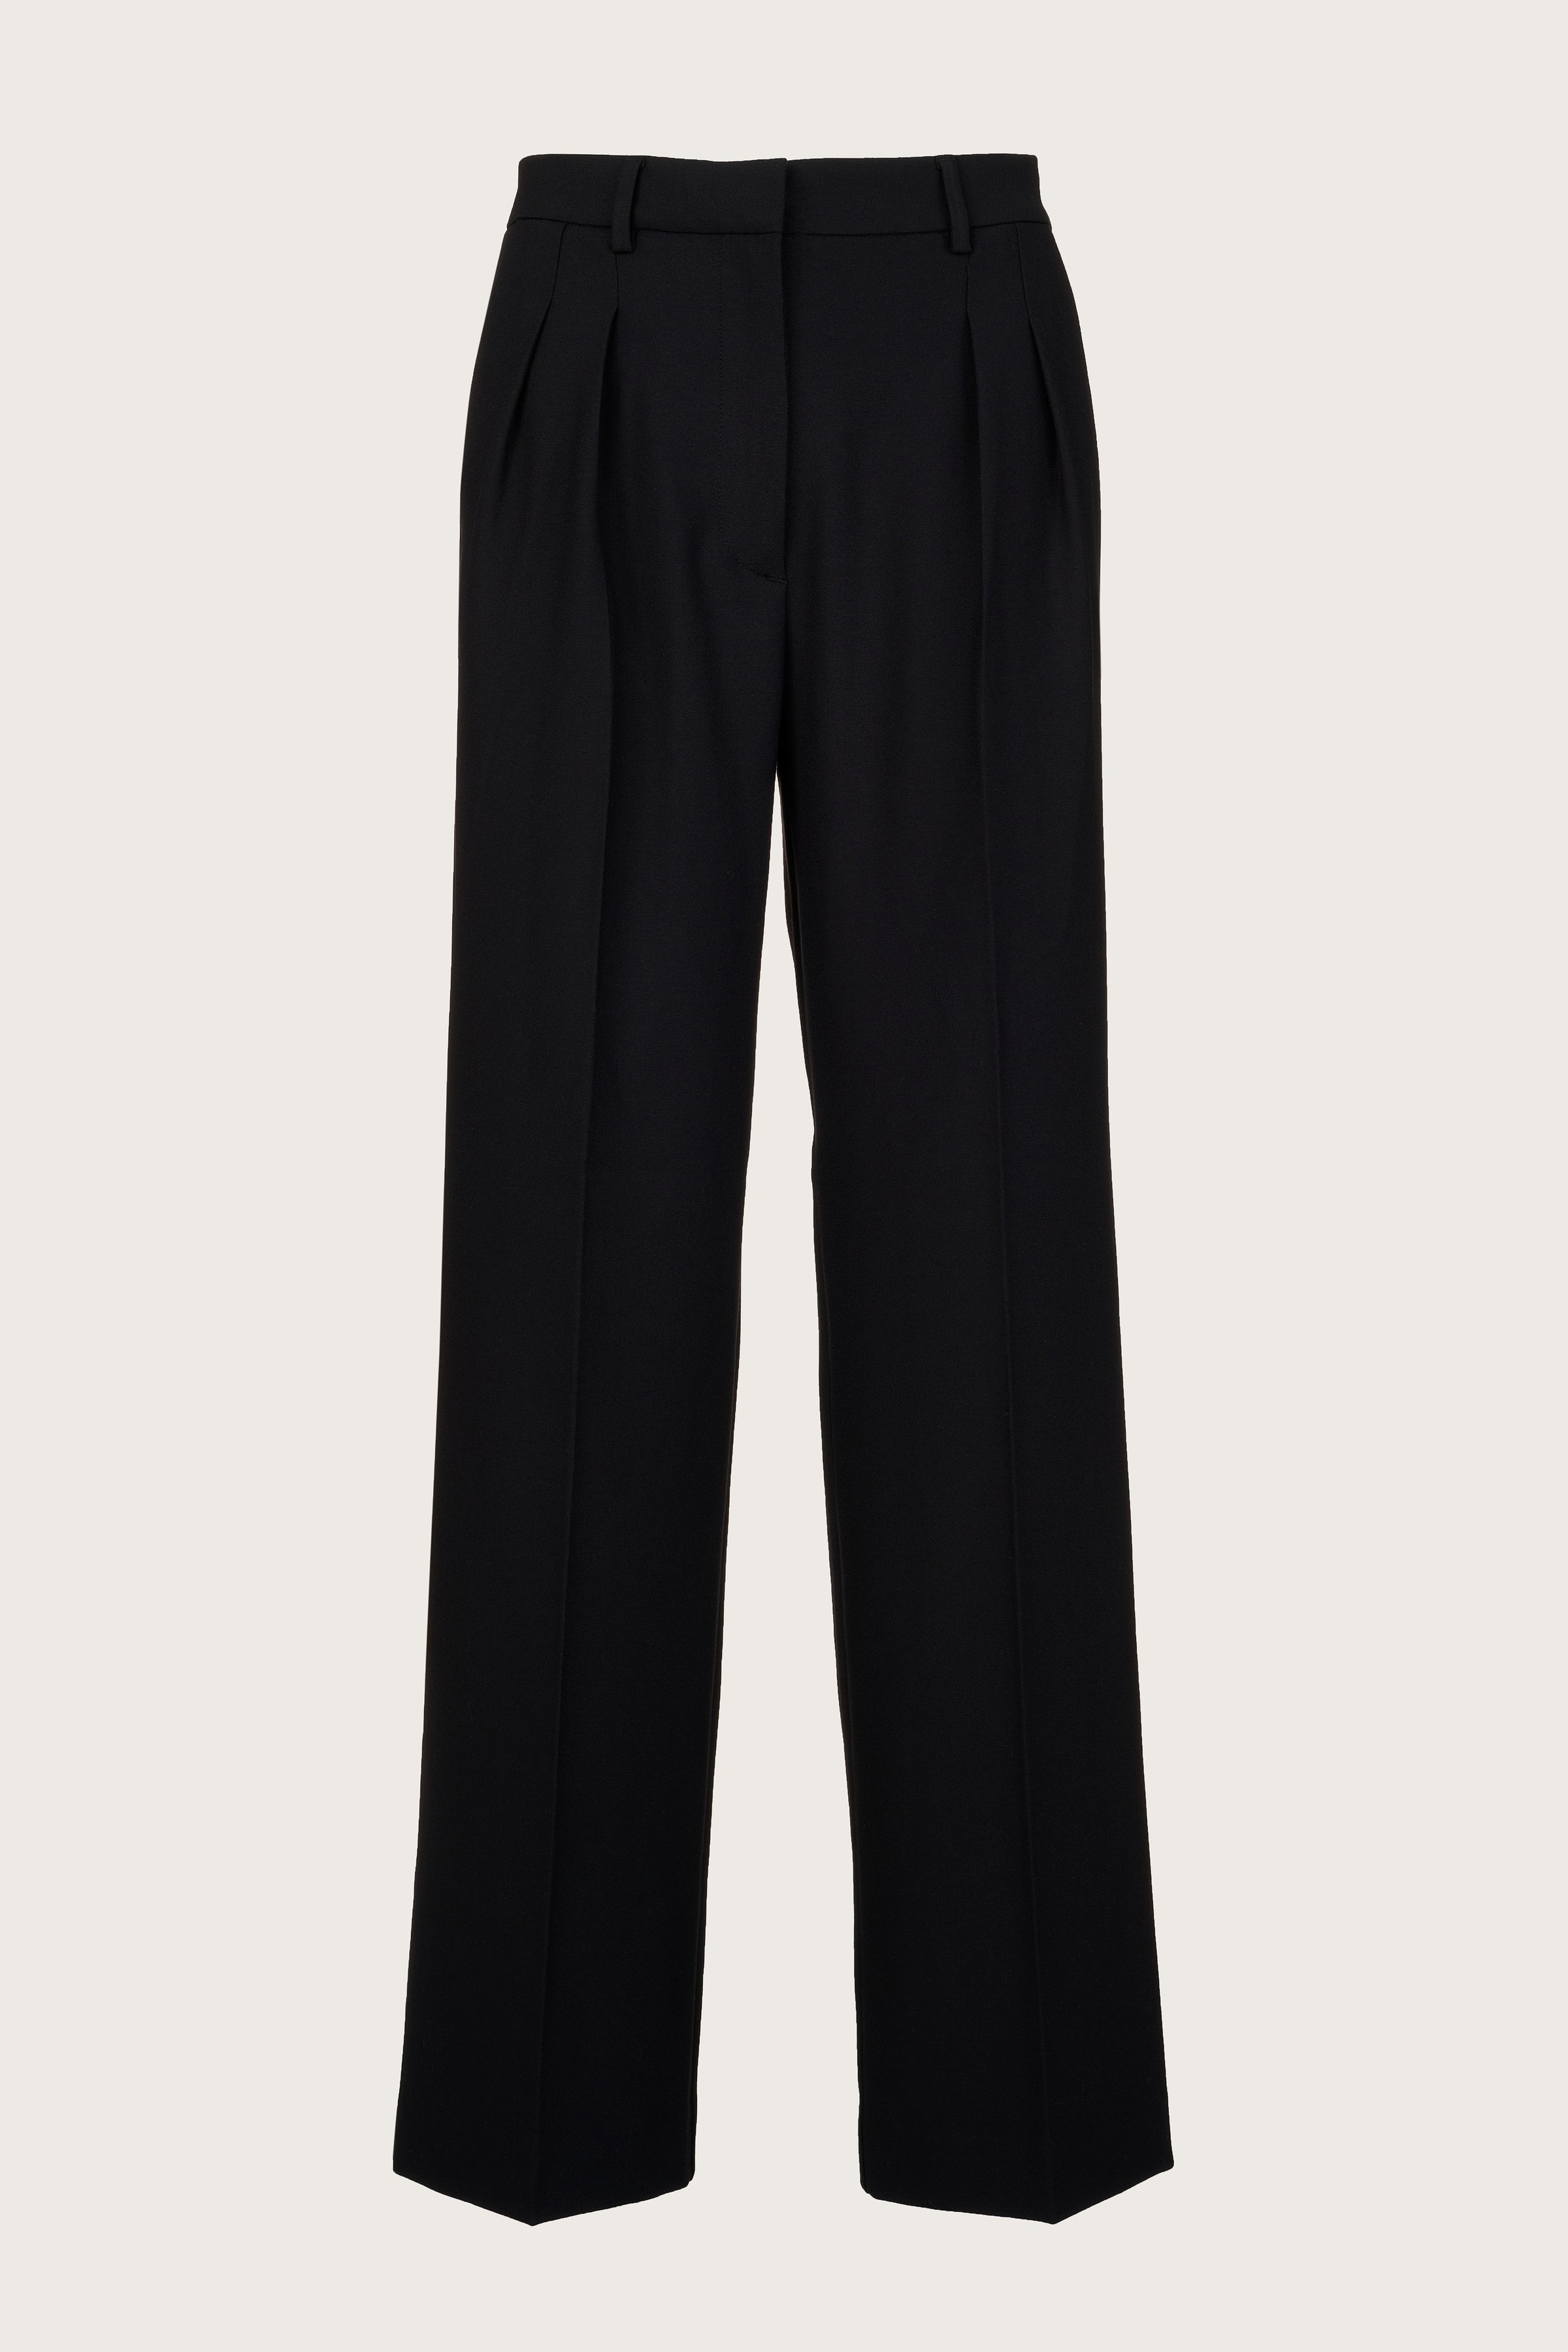 Straight cut black tailored trousers